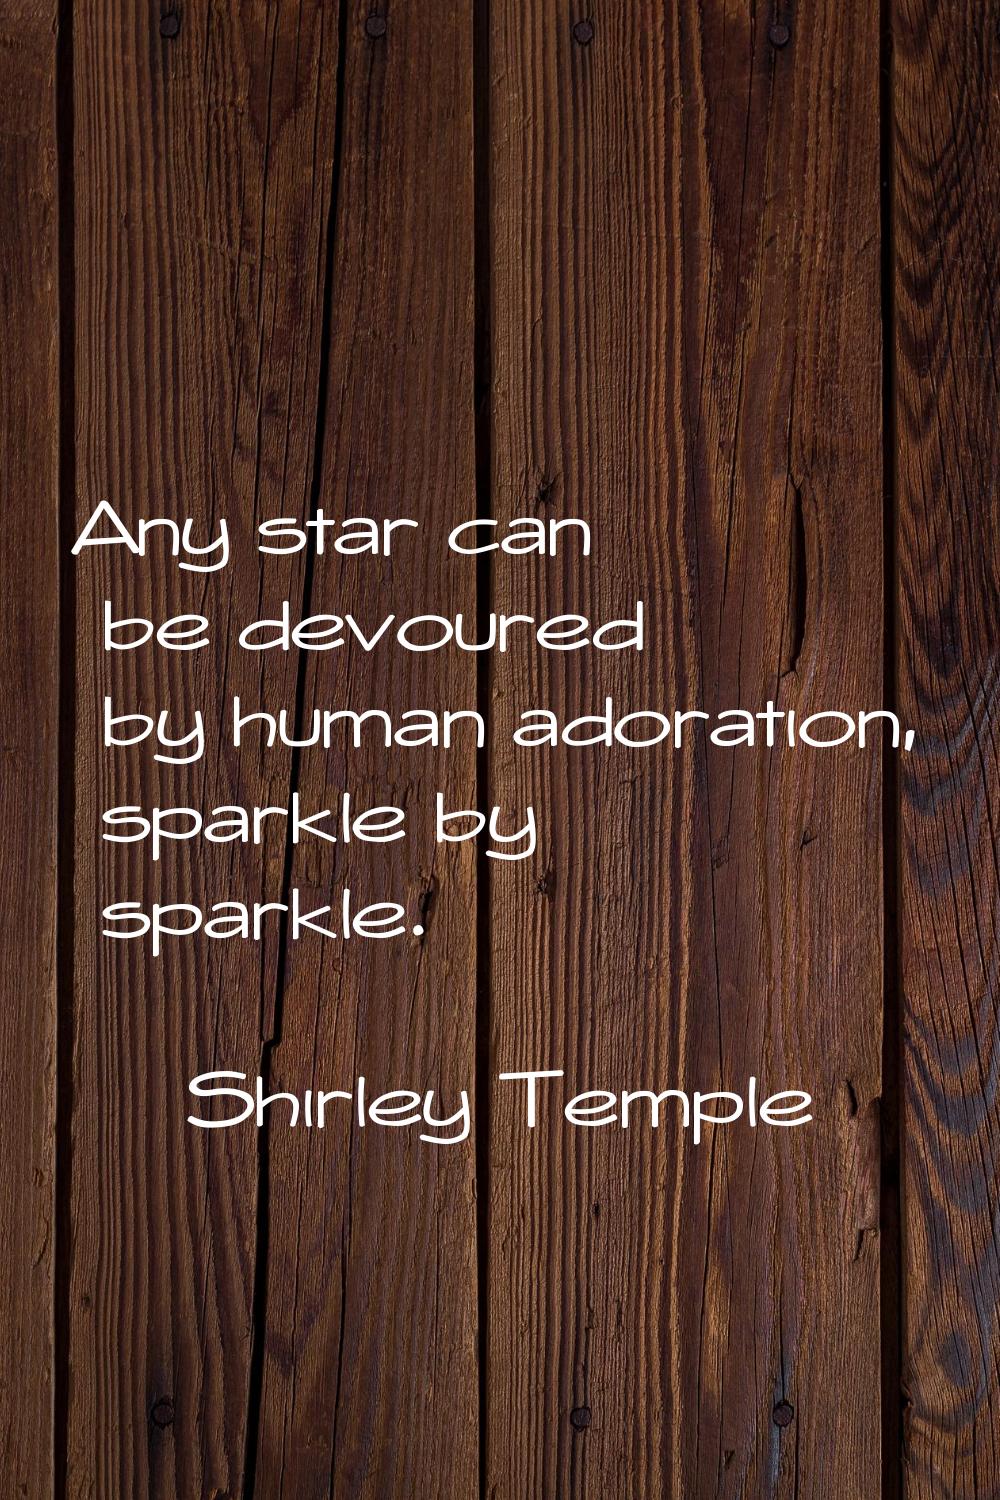 Any star can be devoured by human adoration, sparkle by sparkle.